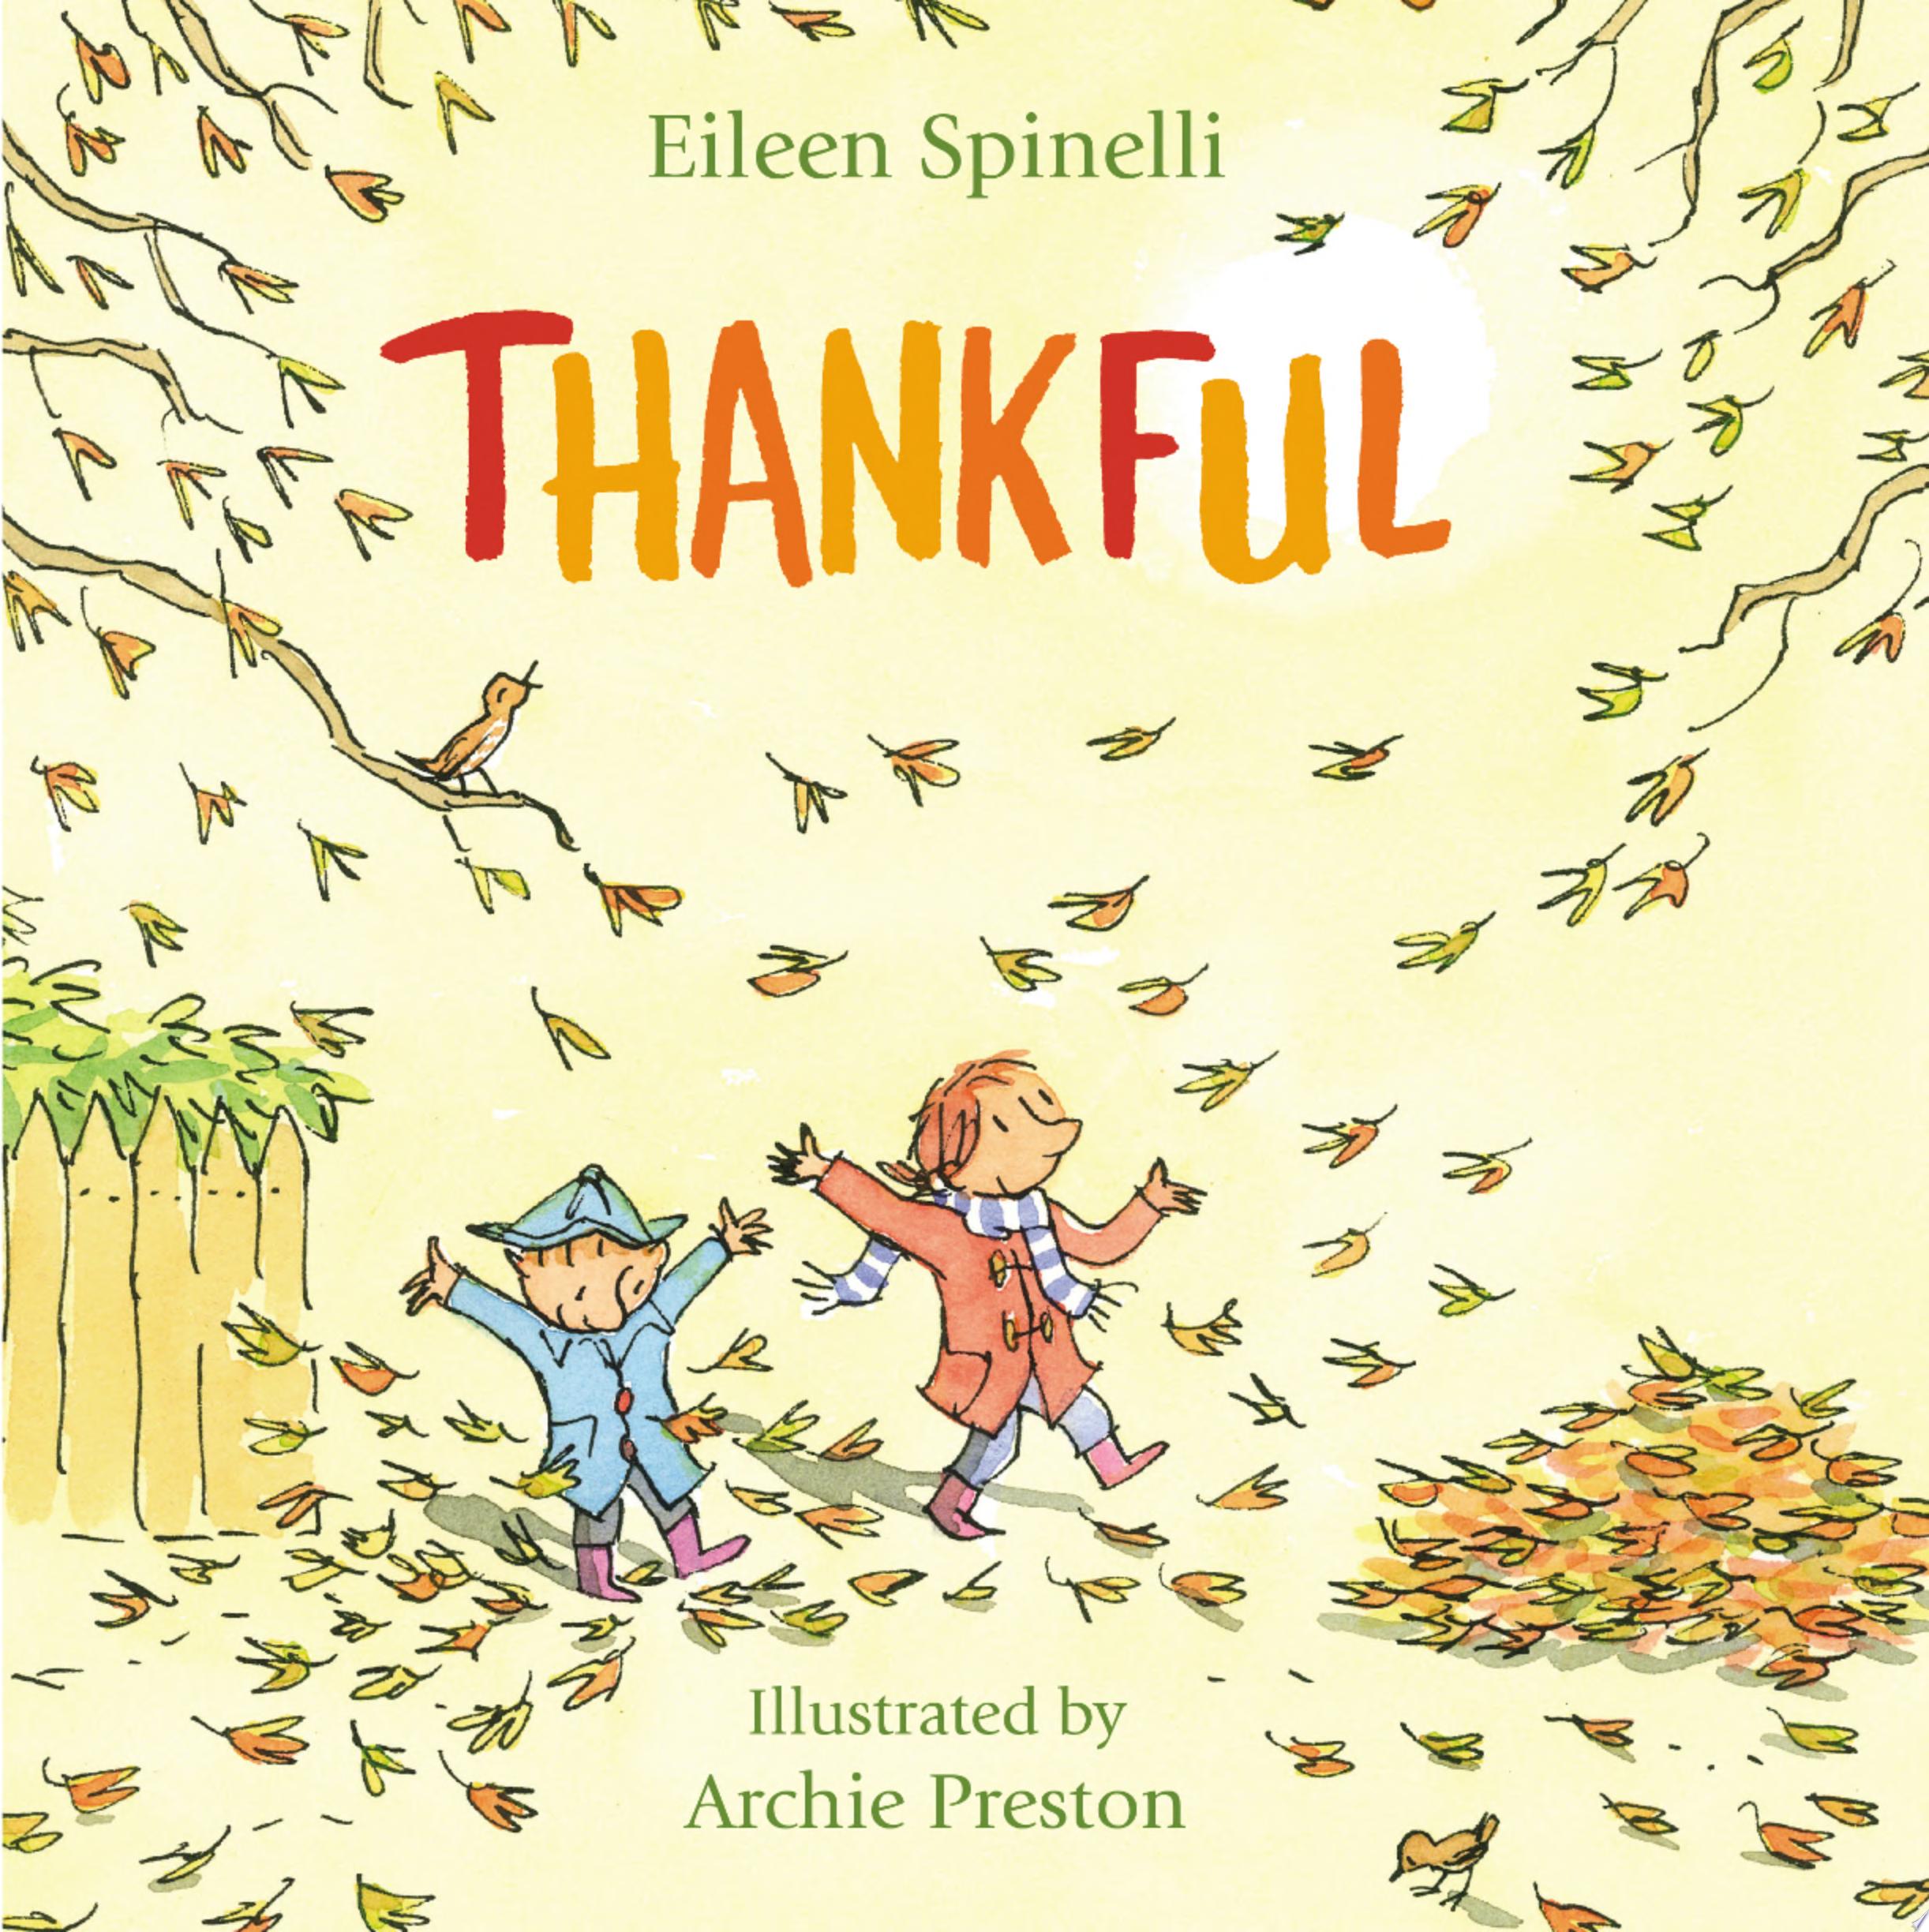 Image for "Thankful" - two kids playing in leaves